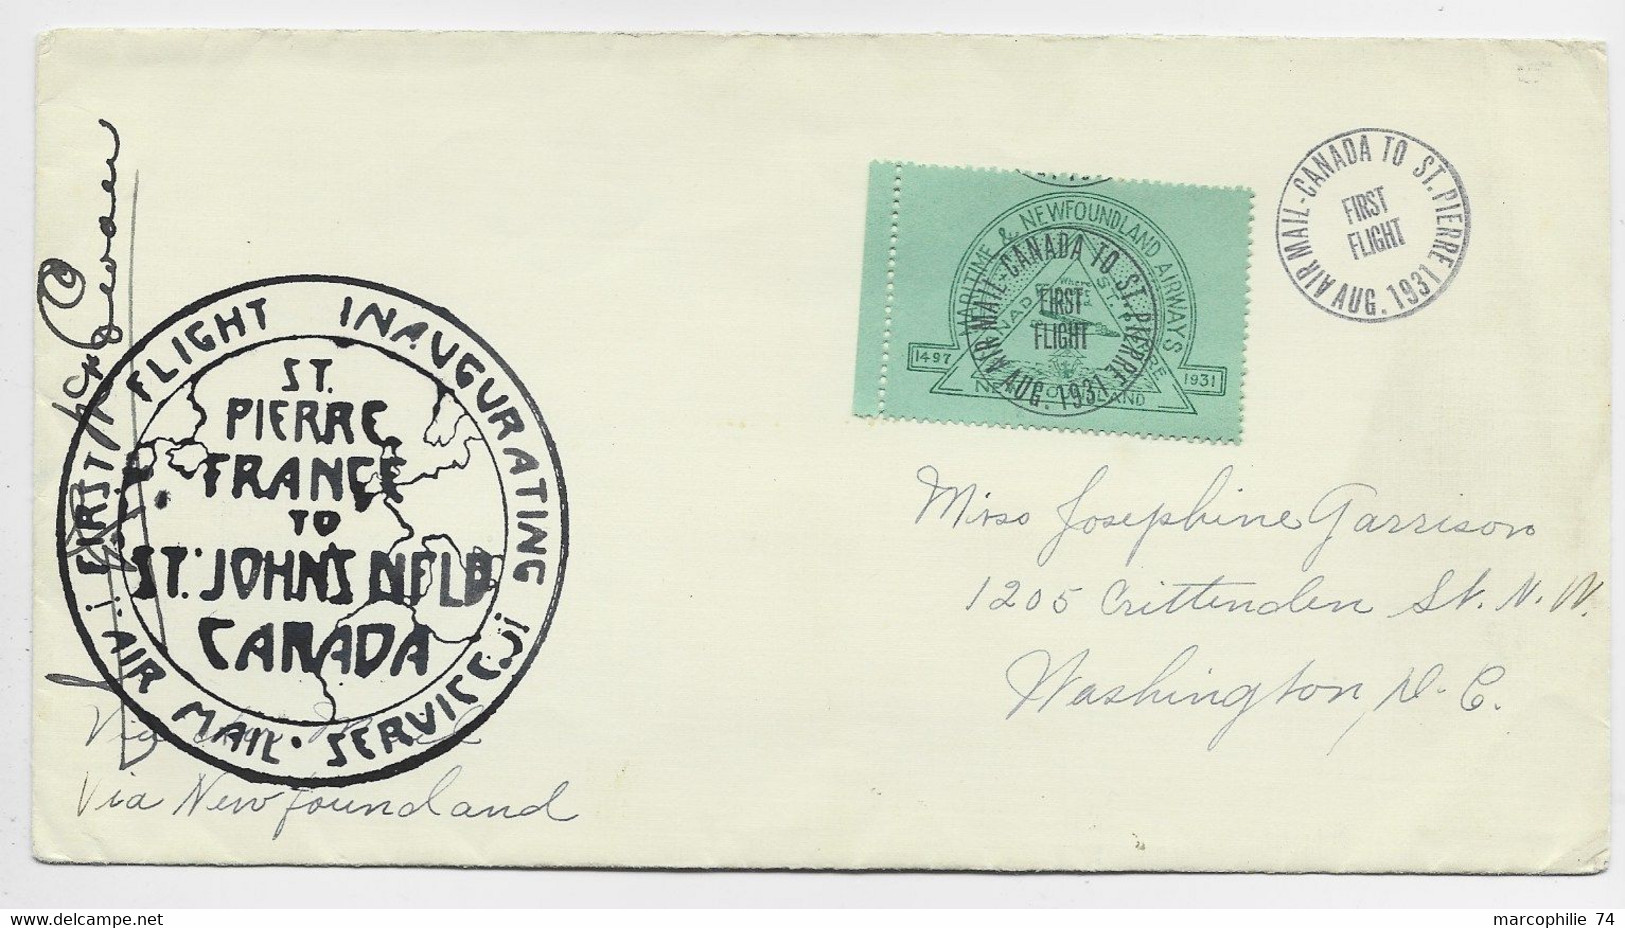 CANADA NEW FOUNLAND AIR WAYS ST PIERRE CANADA FIRST FLIGHT 1931 LETTRE COVER INAUGURATING TO USA + SIGNATURE PILOTE - First Flight Covers